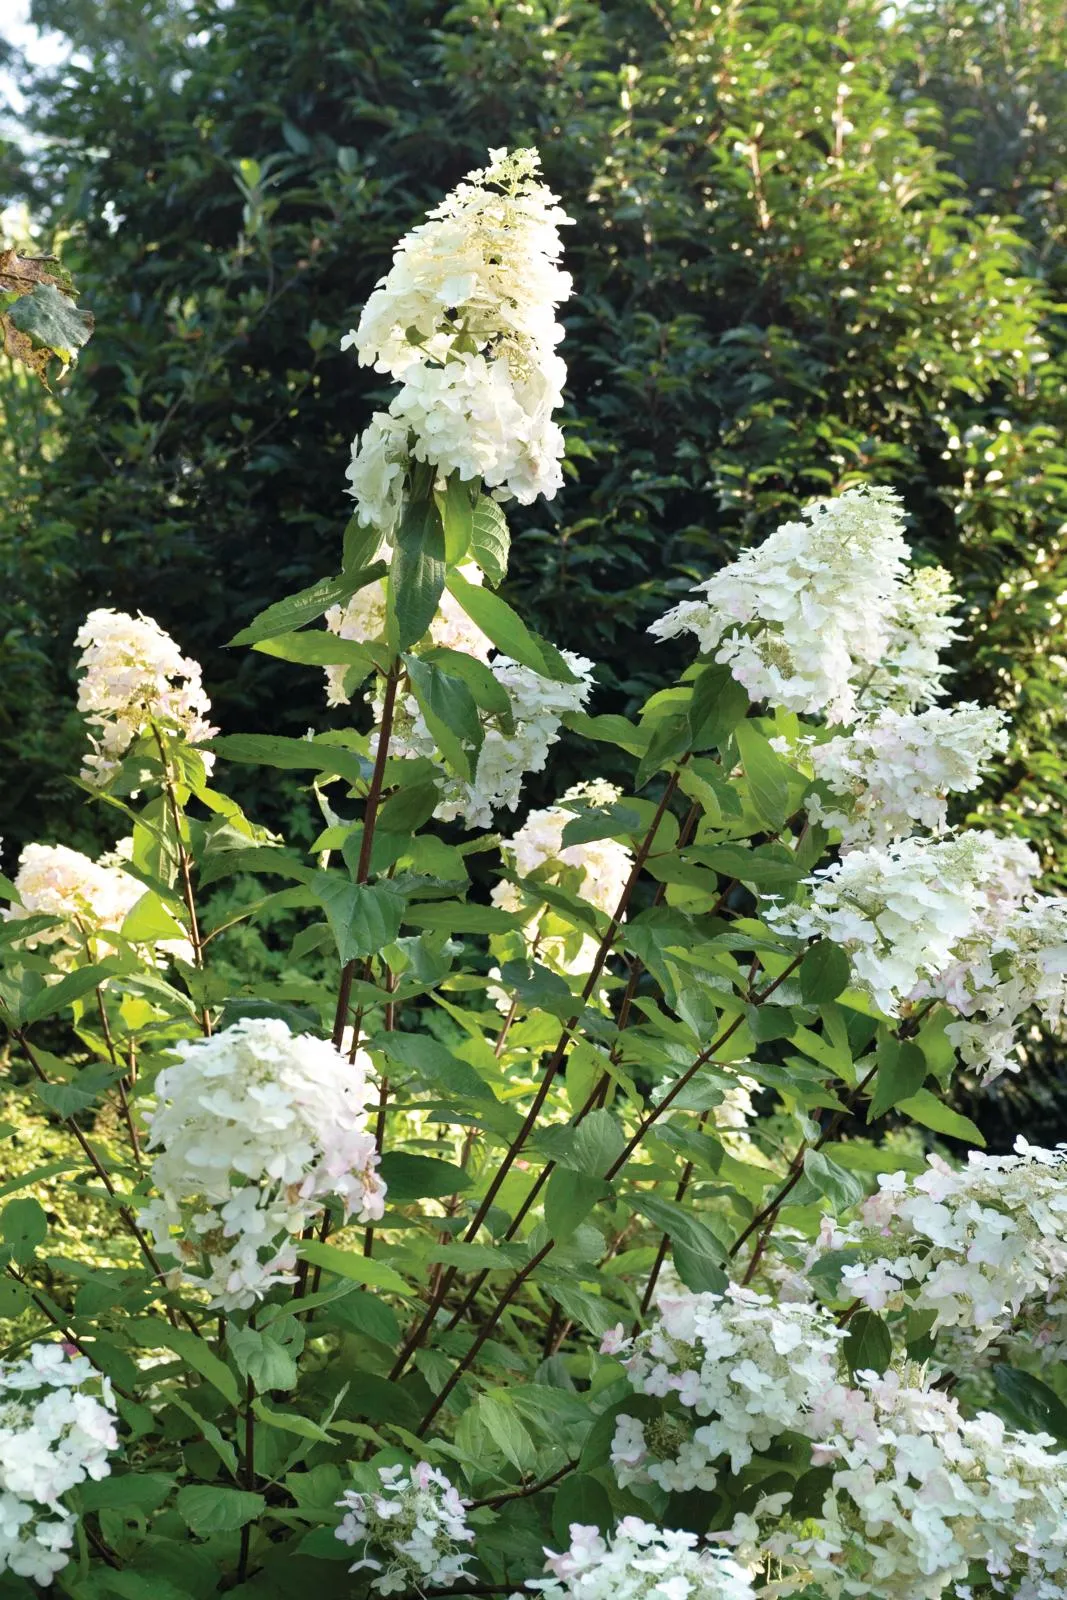 Tall and strong, Hydrangea Paniculata 'Unique' has large round cones of mostly sterile florets, creamy-white flushing purple-pink, then green.